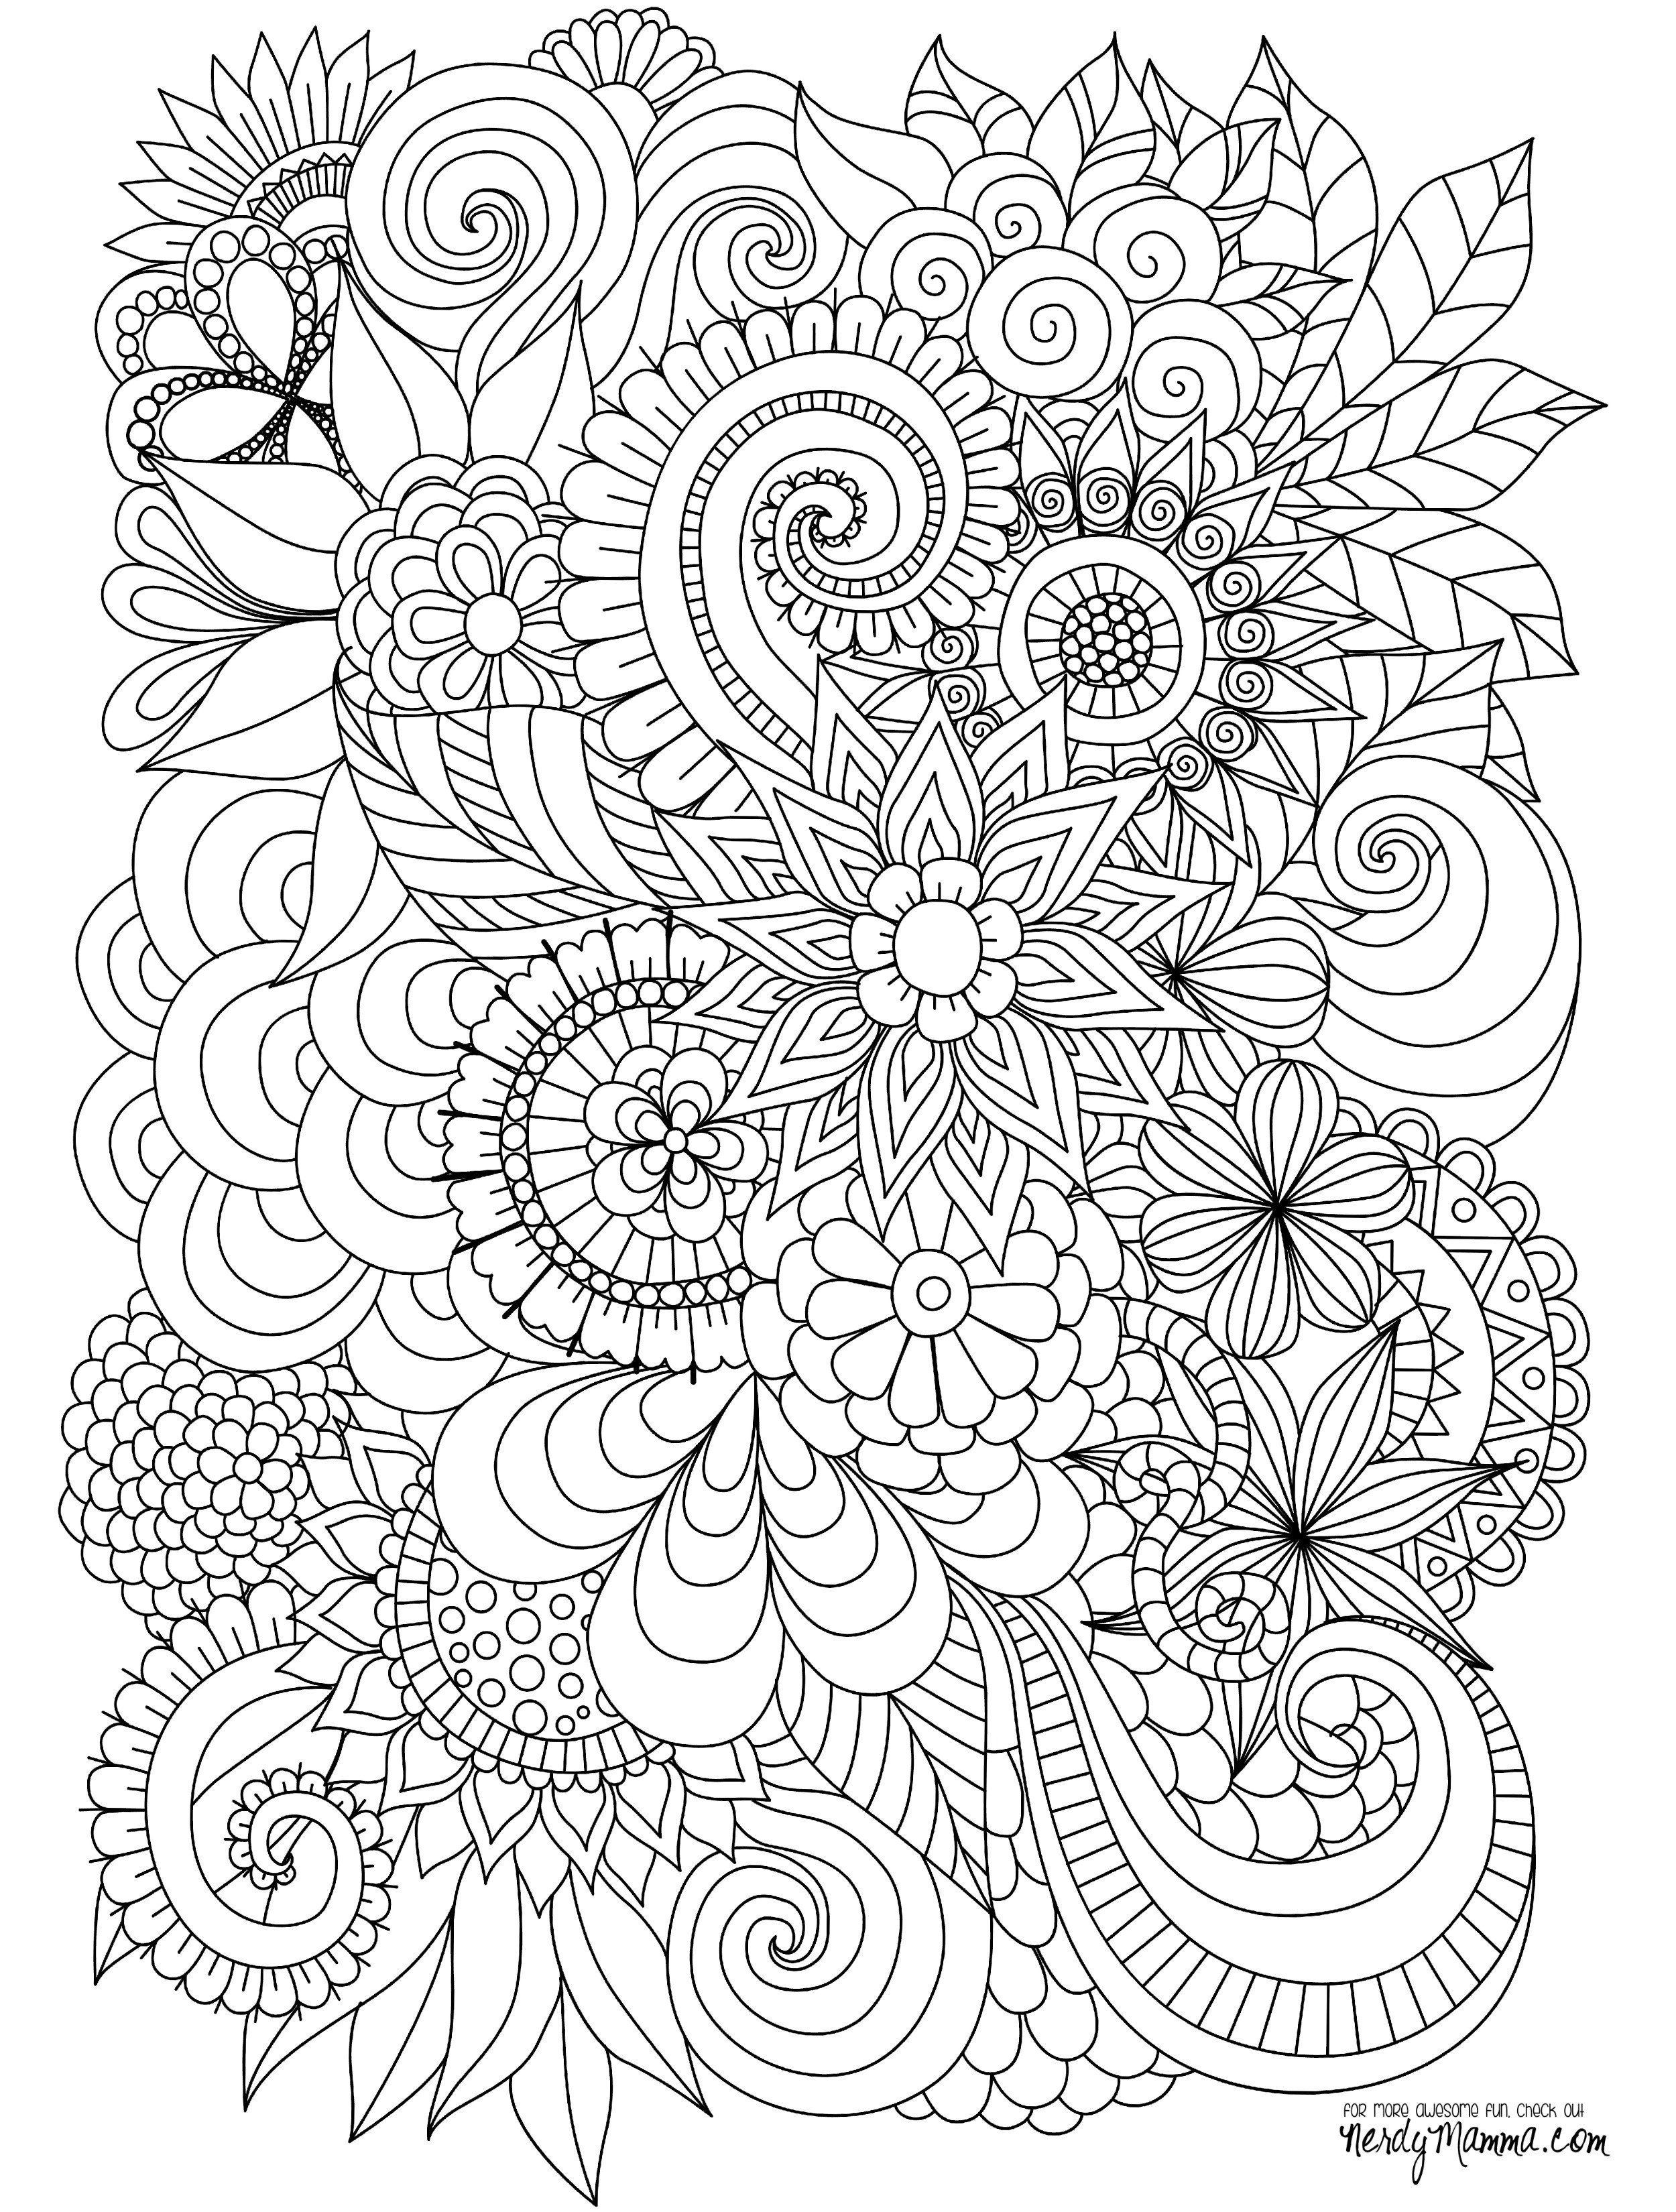 Zentangle Patterns Coloring Pages at GetColorings.com | Free printable ...